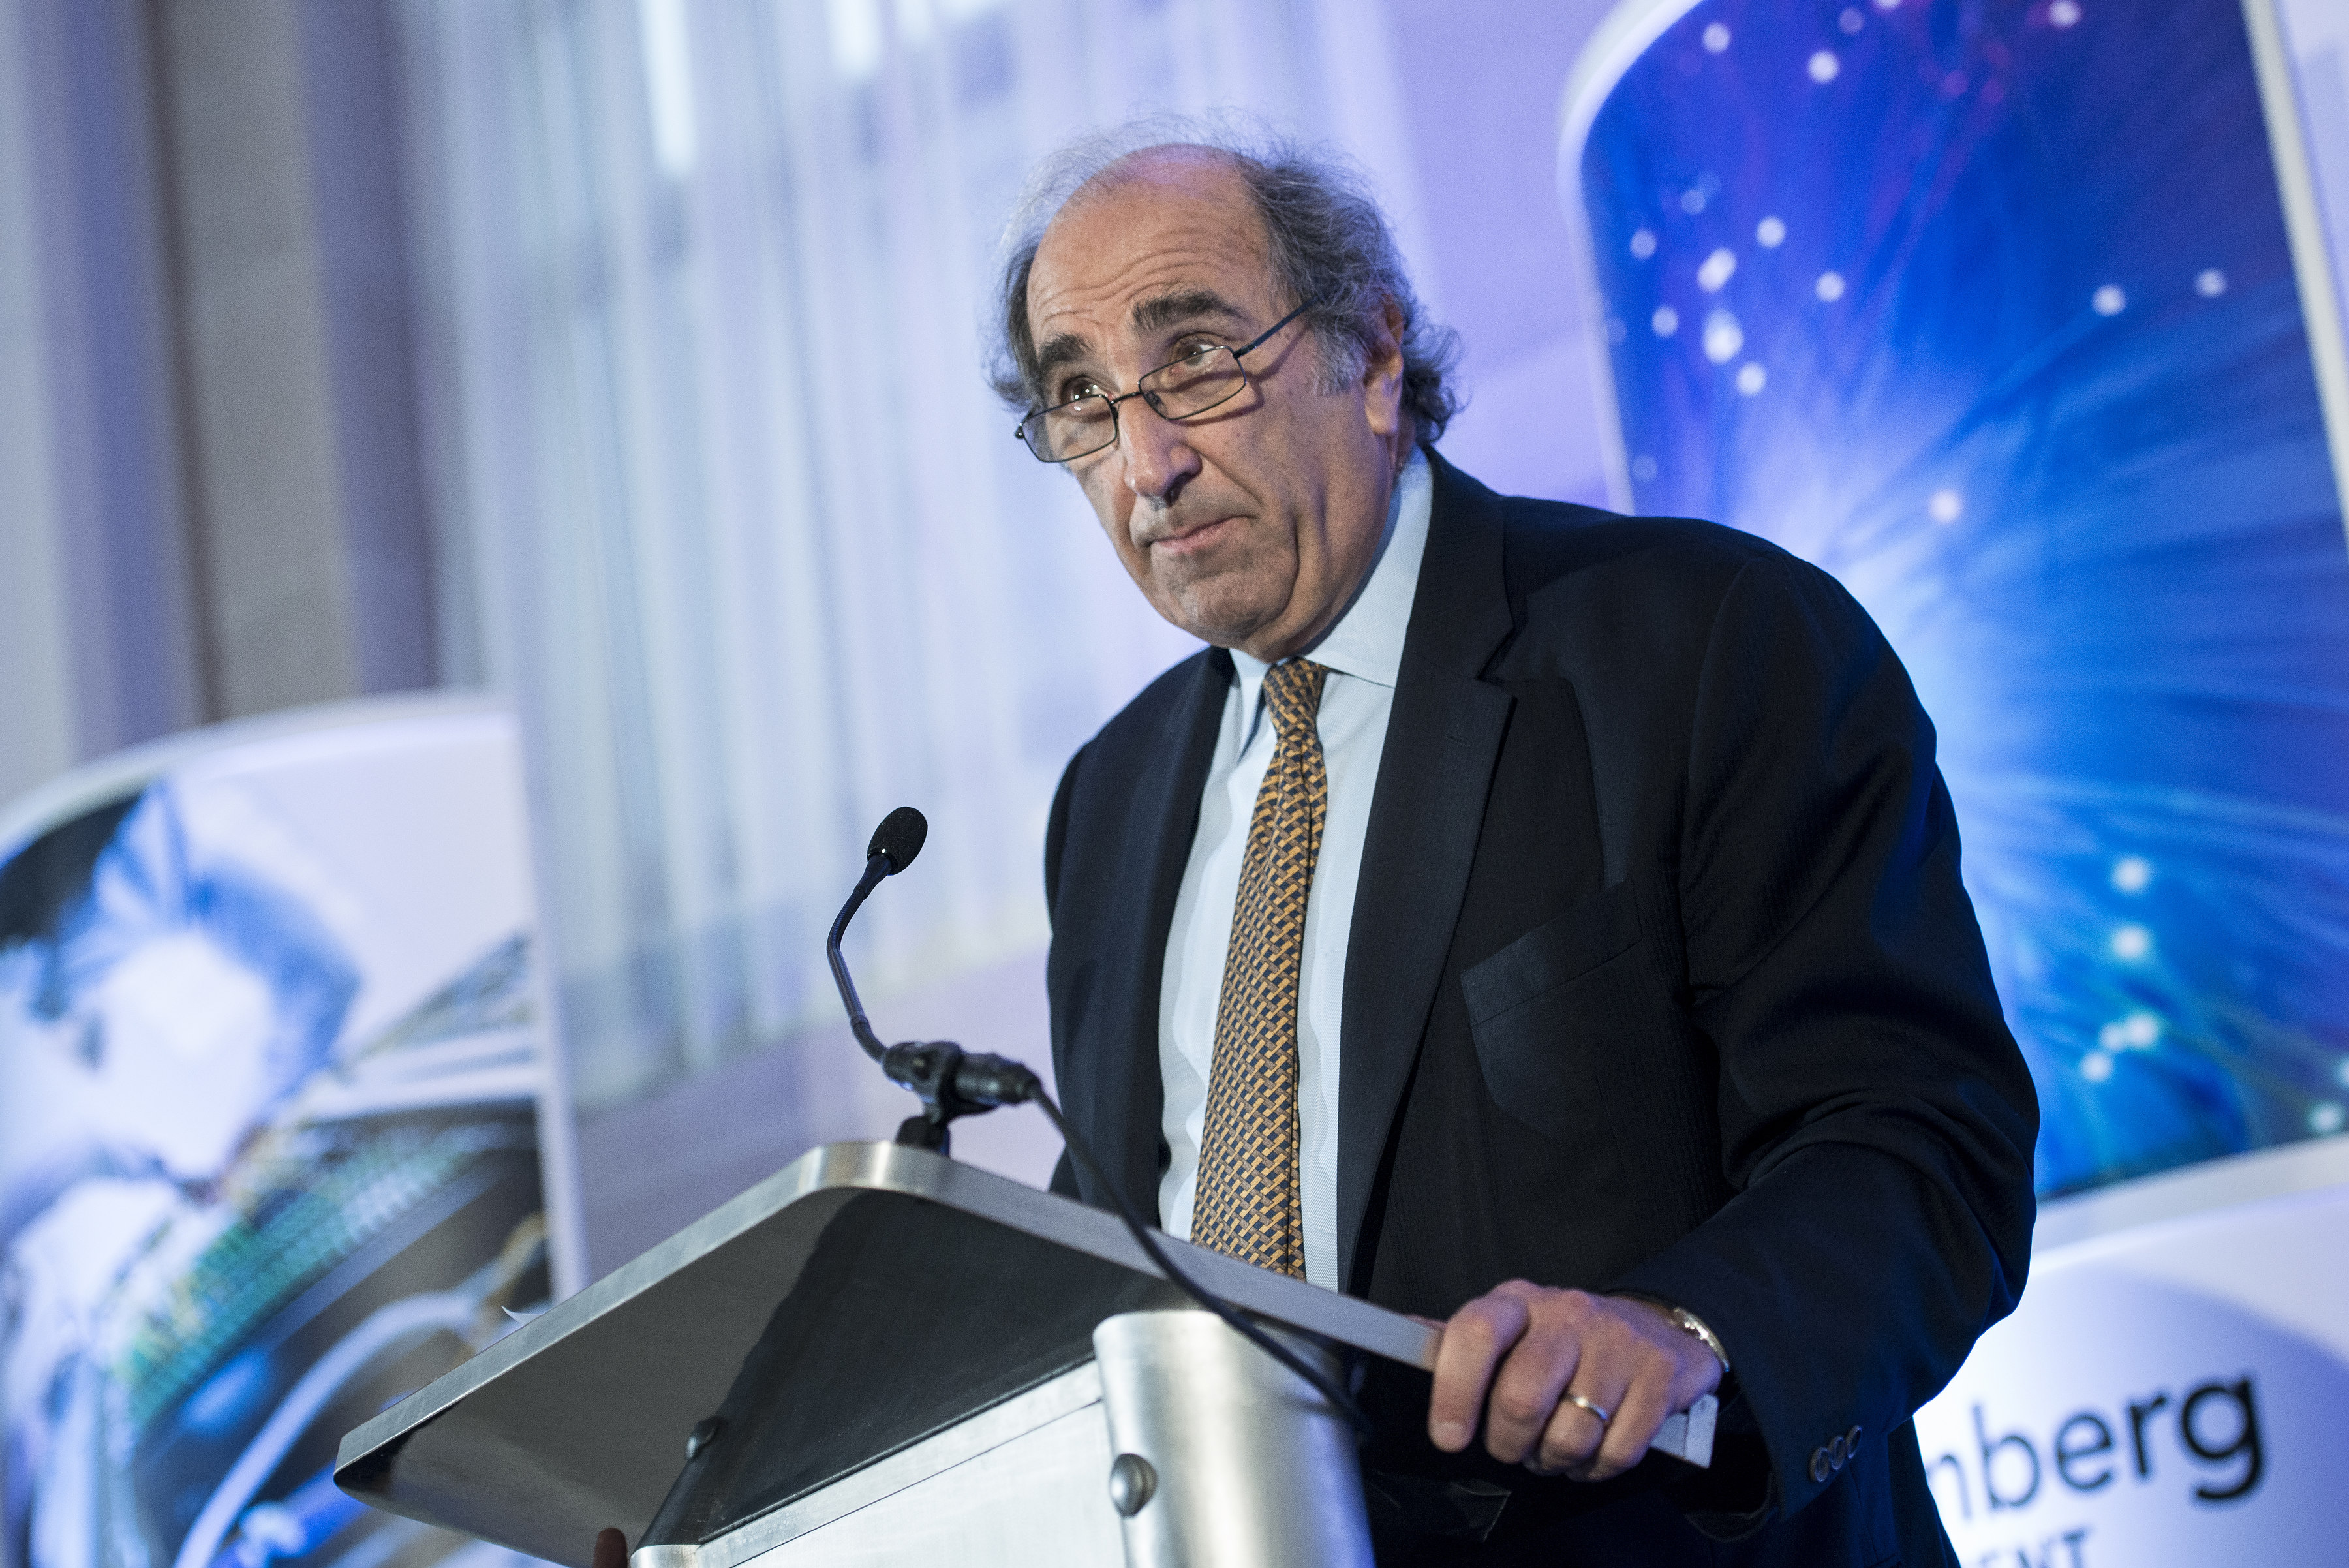 Andy Lack, Chairman of the Bloomberg Media Group, speaks during a discussion October 30, 2013 in Washington, DC. (BRENDAN SMIALOWSKI/AFP via Getty Images)